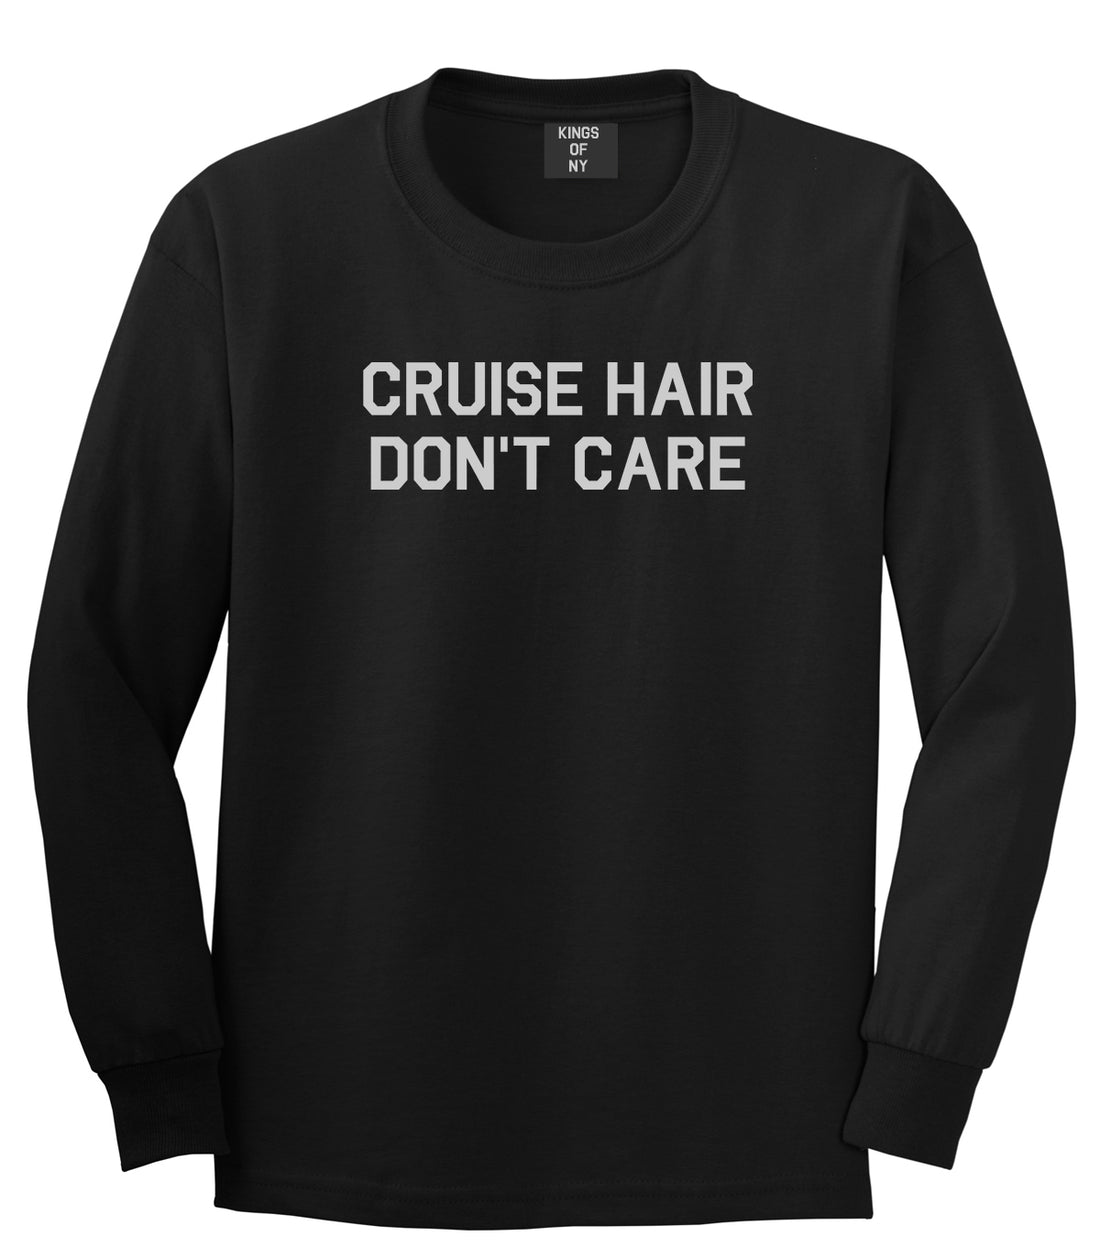 Cruise Hair Dont Care Mens Black Long Sleeve T-Shirt by Kings Of NY